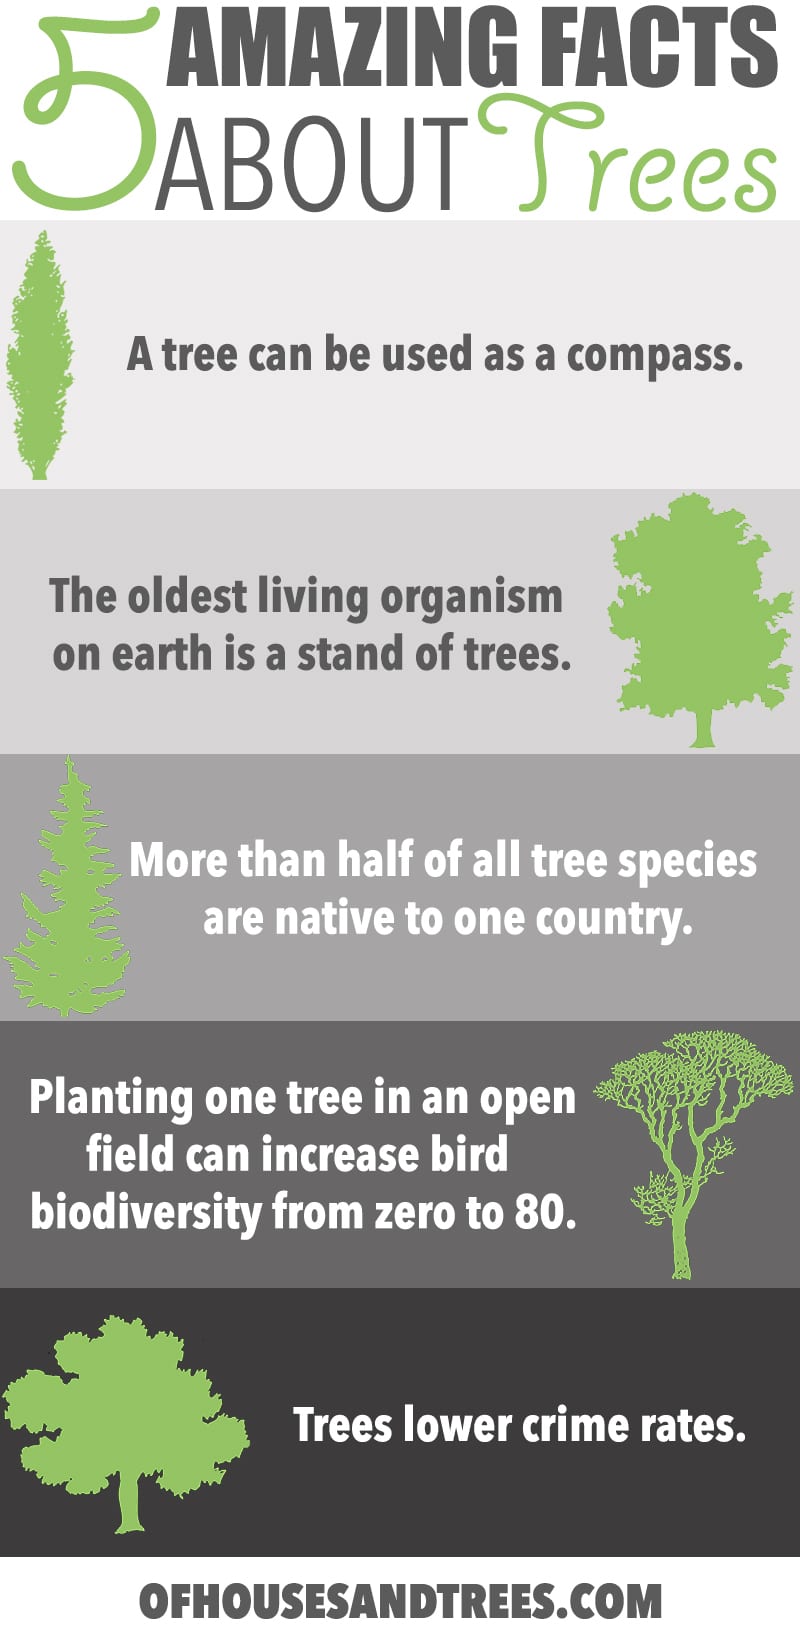 Amazing Facts About Trees | Five amazing facts about trees! Did you know a tree can be used as a compass, fight crime and increase bird biodiversity from zero to 80 species?